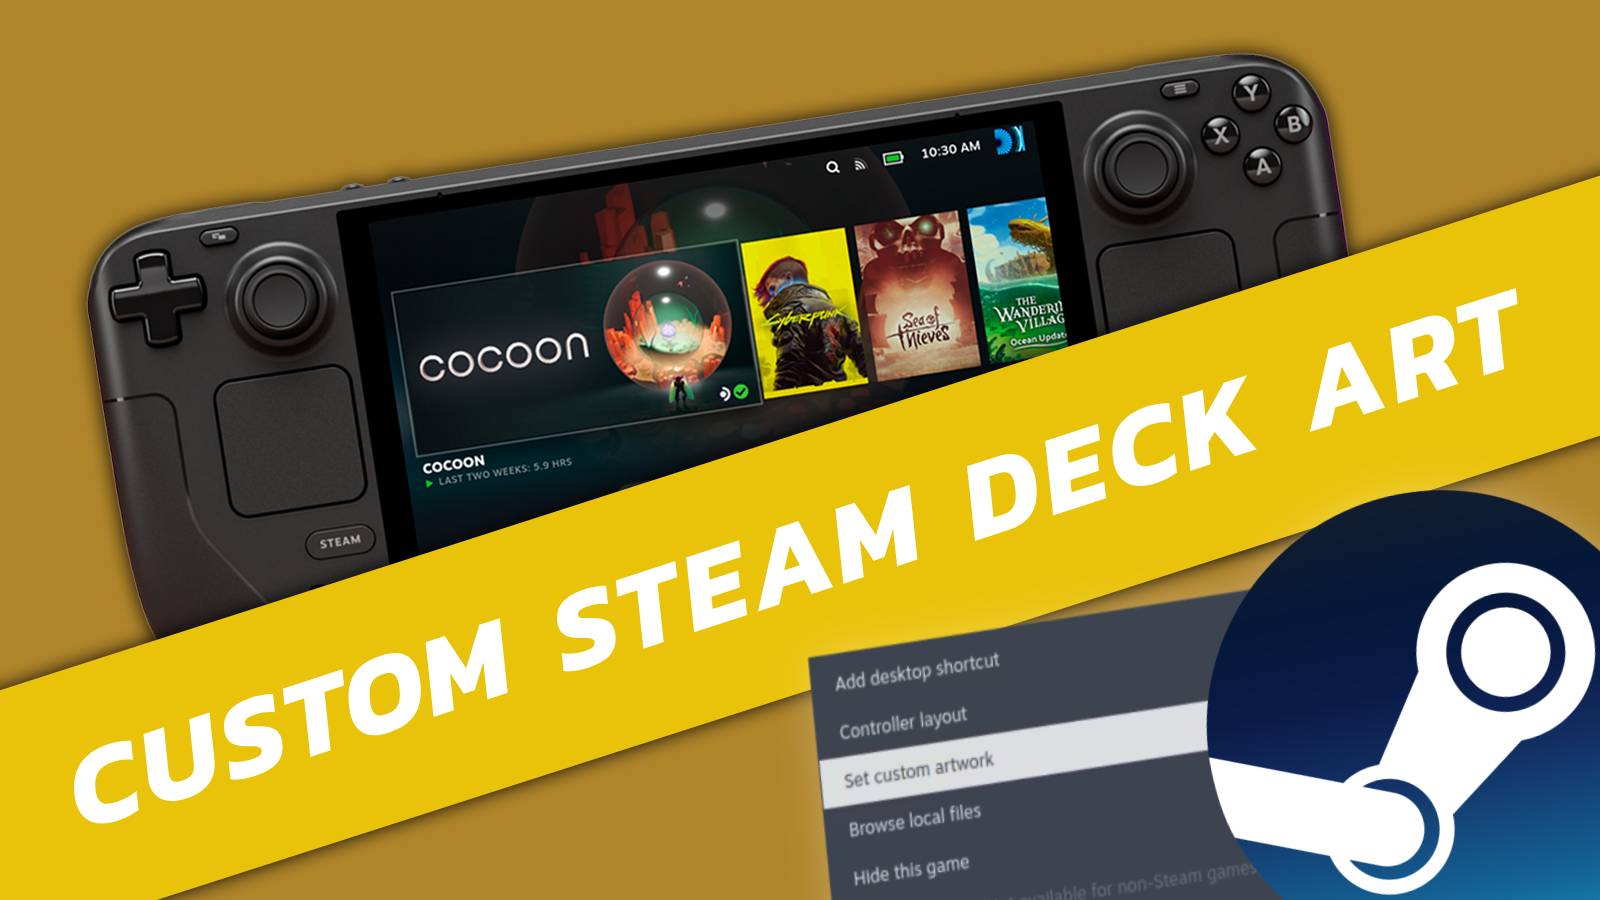 Image of a Steam Deck, with the Steam logo and a drop-down menu in the bottom right corner.